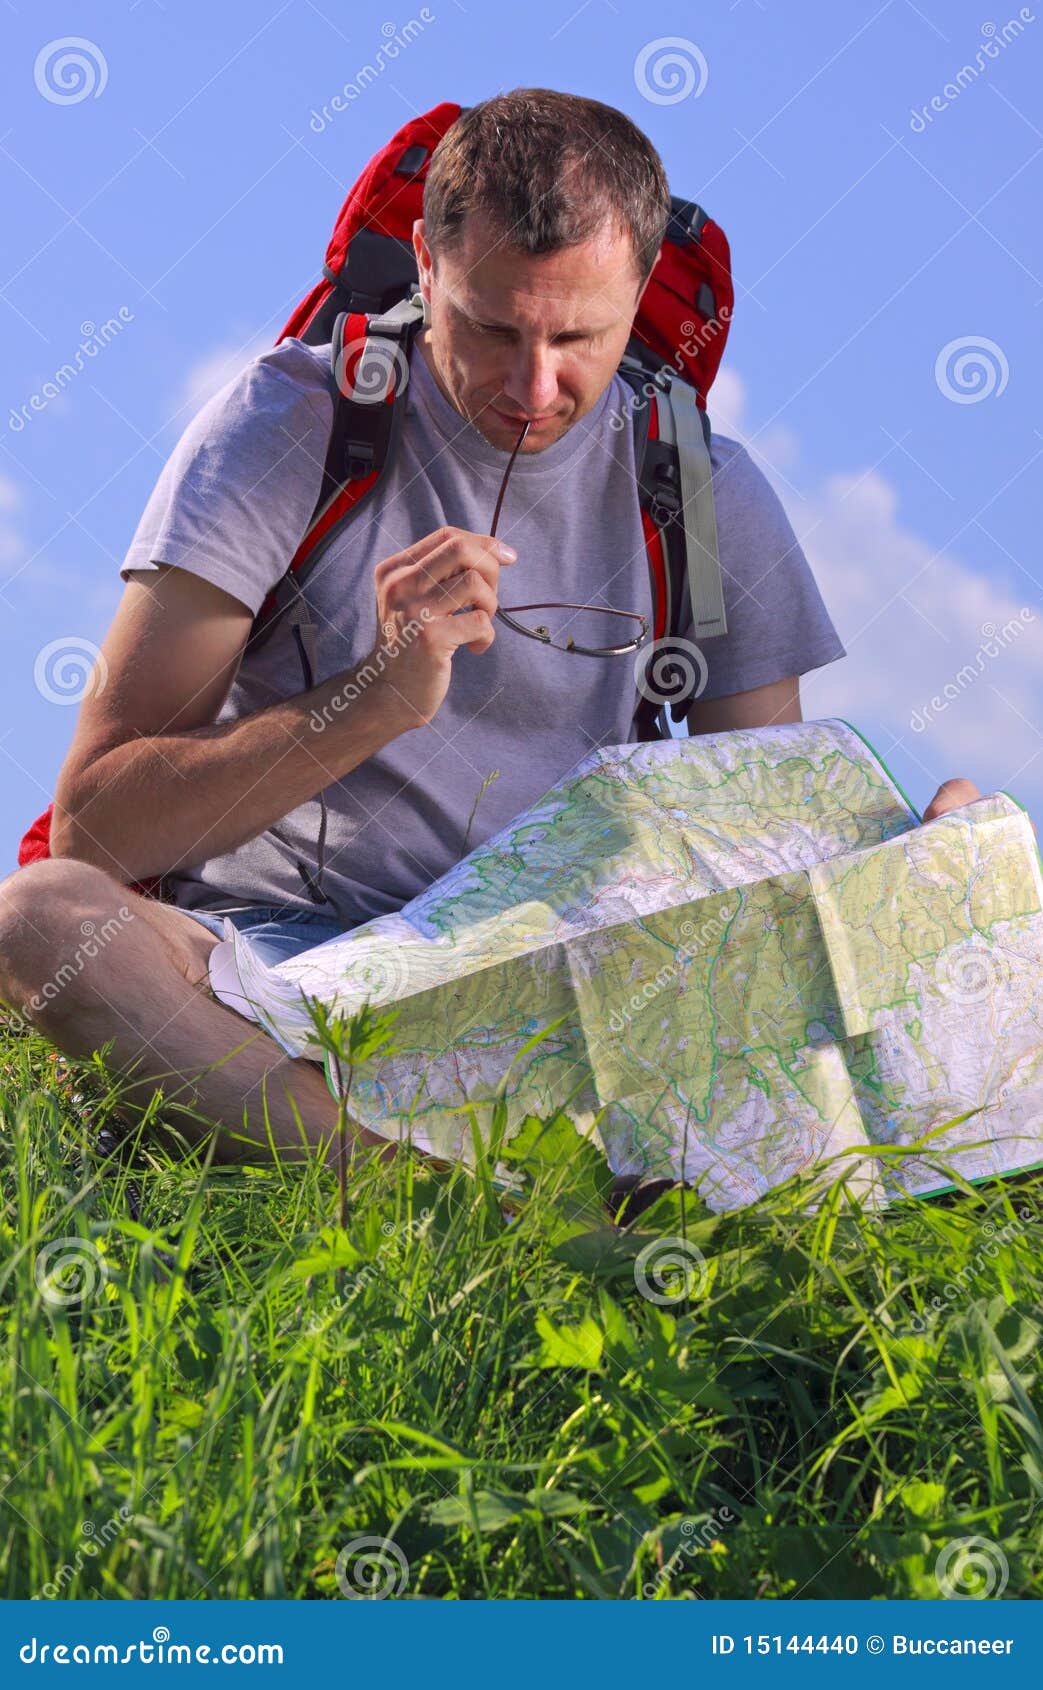 Tourist looking on map stock photo. Image of summer, backpack - 15144440